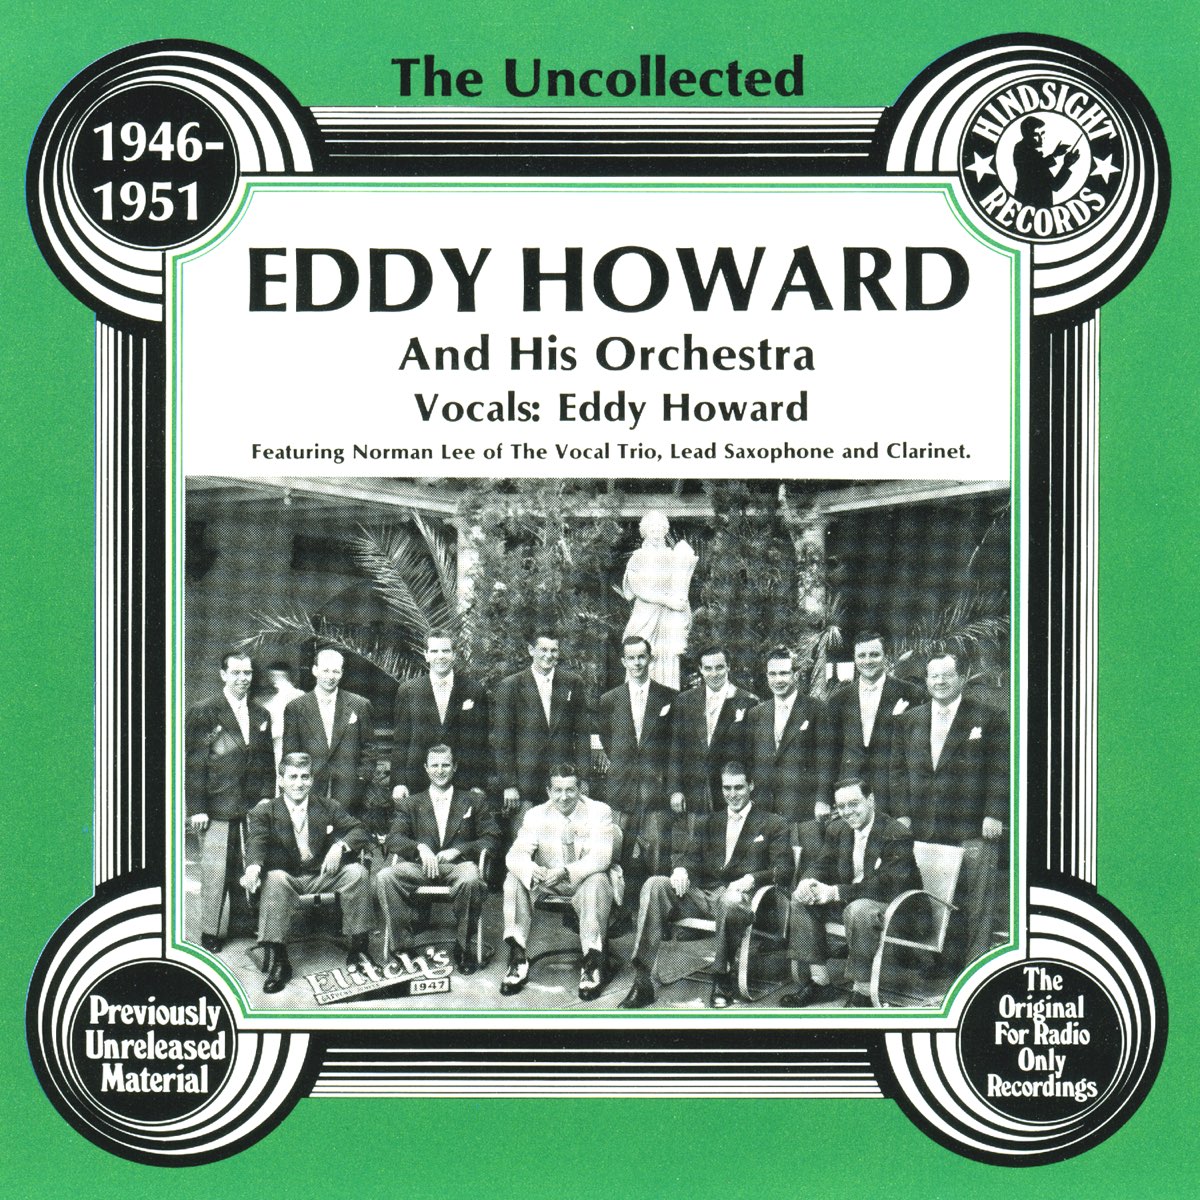 1946 1951. Eddie Miller and his Orchestra _ the Uncollected. Will Osborne and his Orchestra _ the Uncollected. Eddy Howard it's no sin. Jimmie Grier and his Orchestra _ the Uncollected.